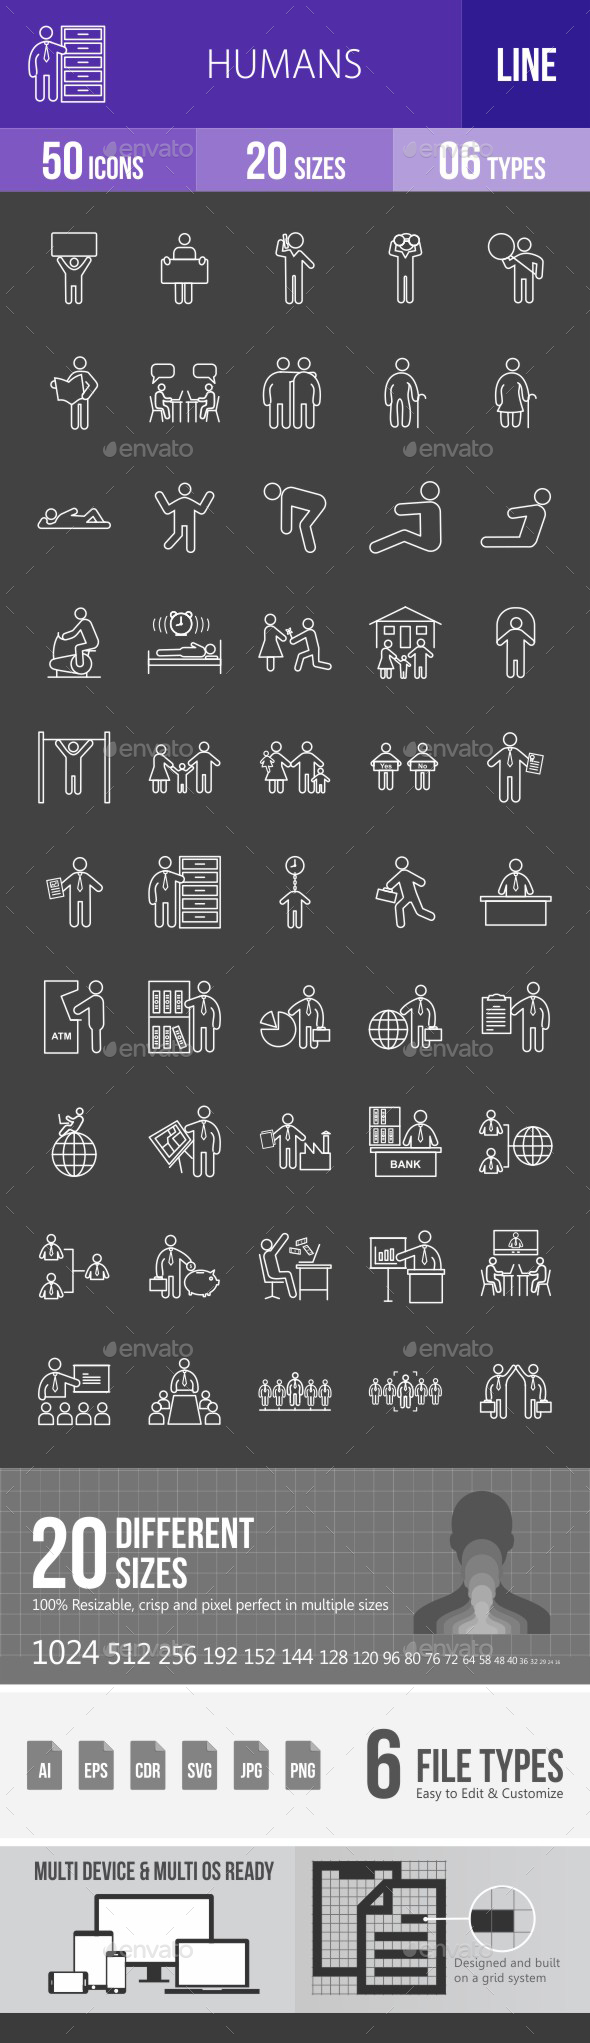 Humans Line Inverted Icons